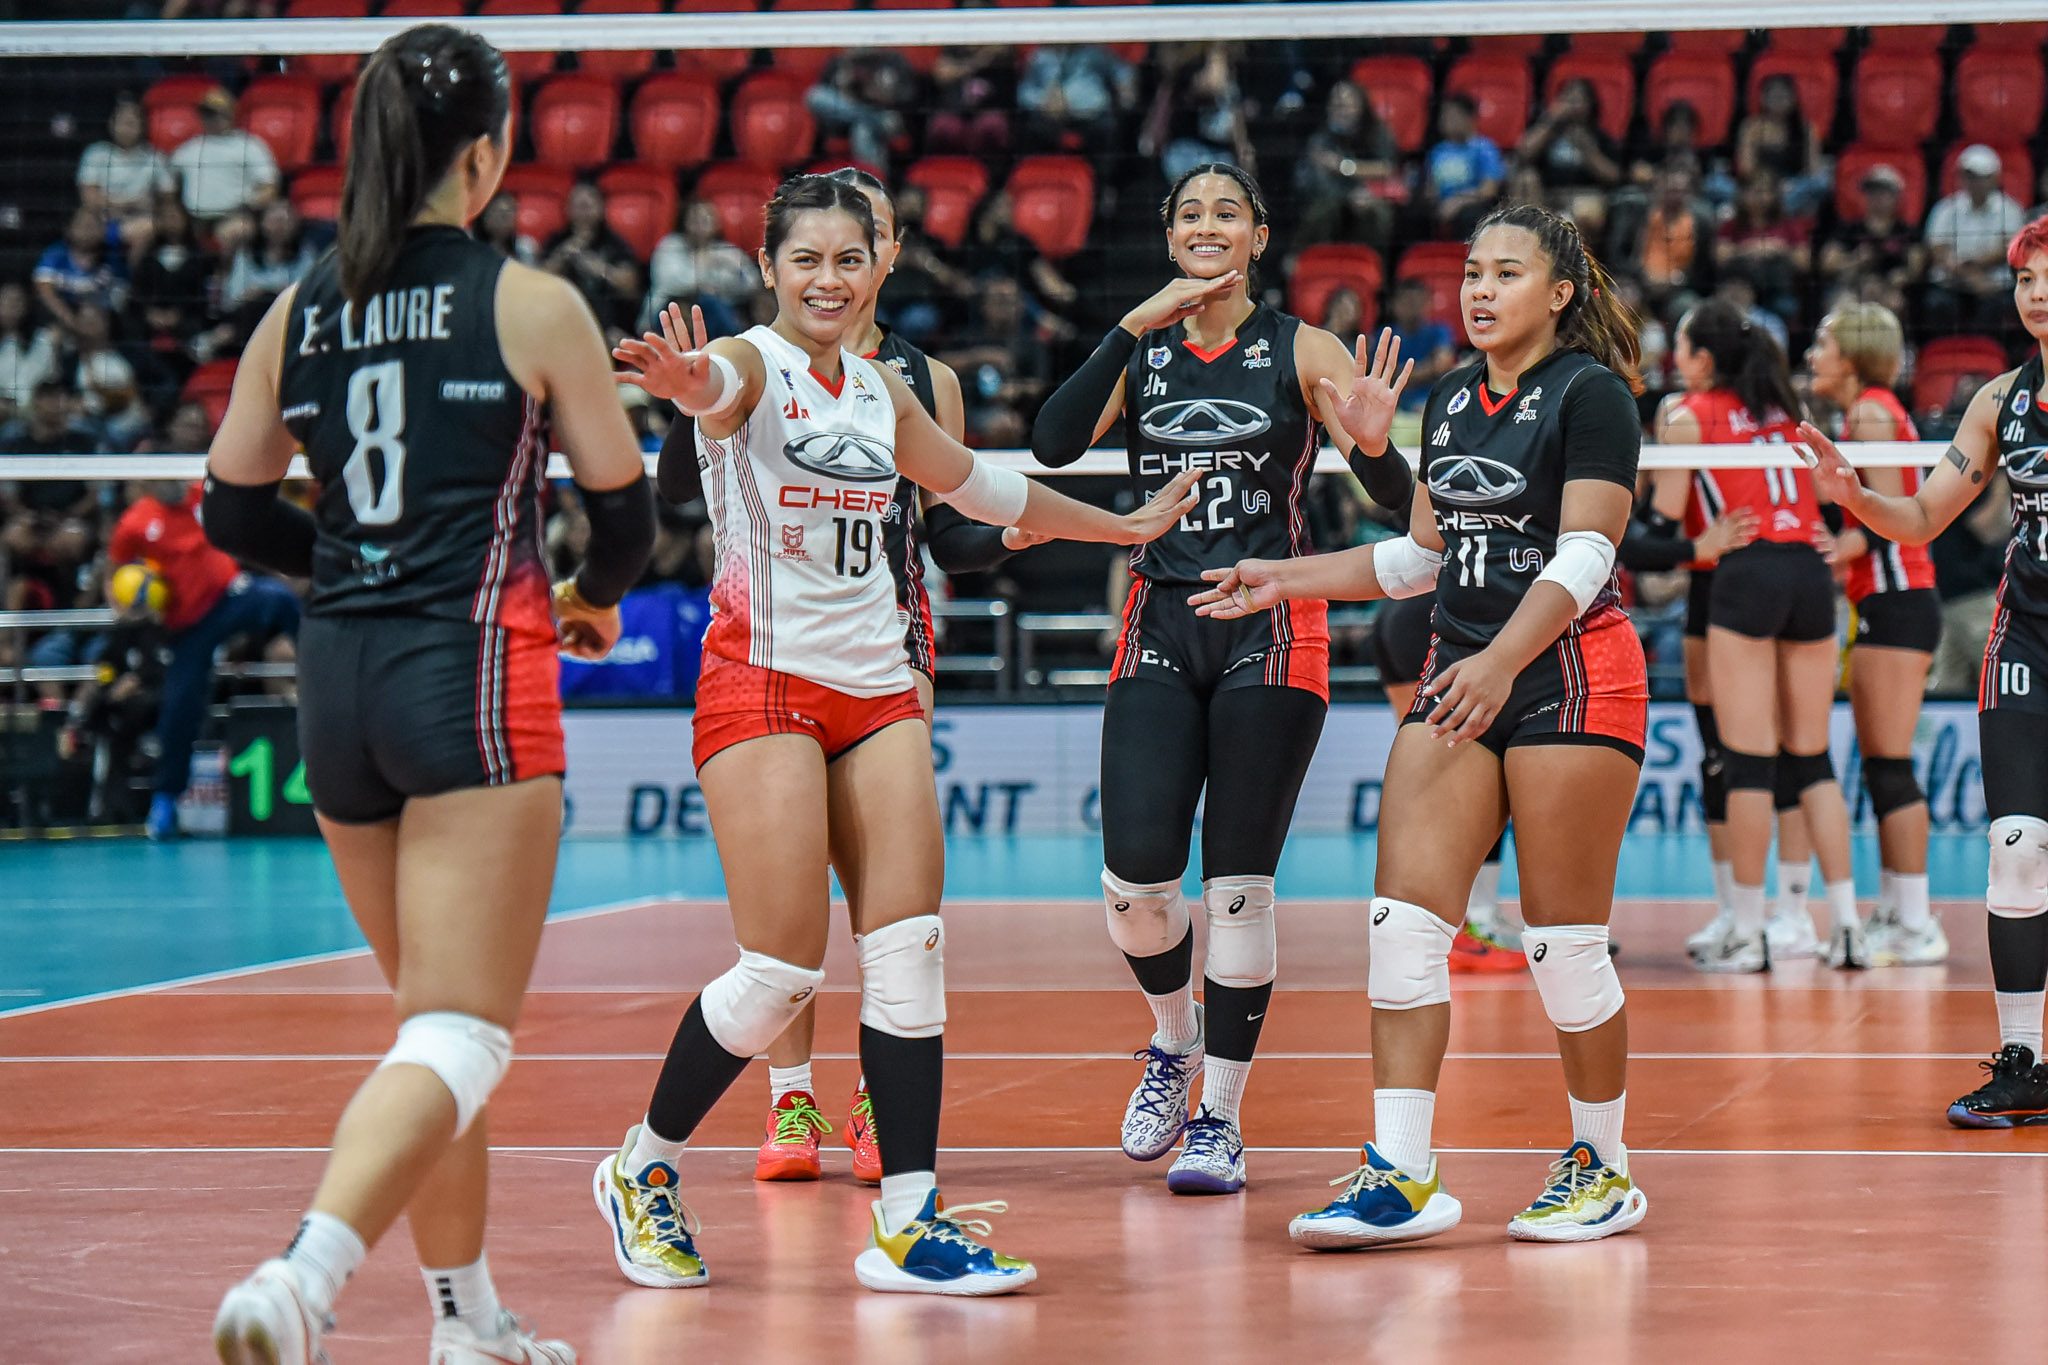 Cruise control: Eya Laure credits solid Chery support system after 4th straight win